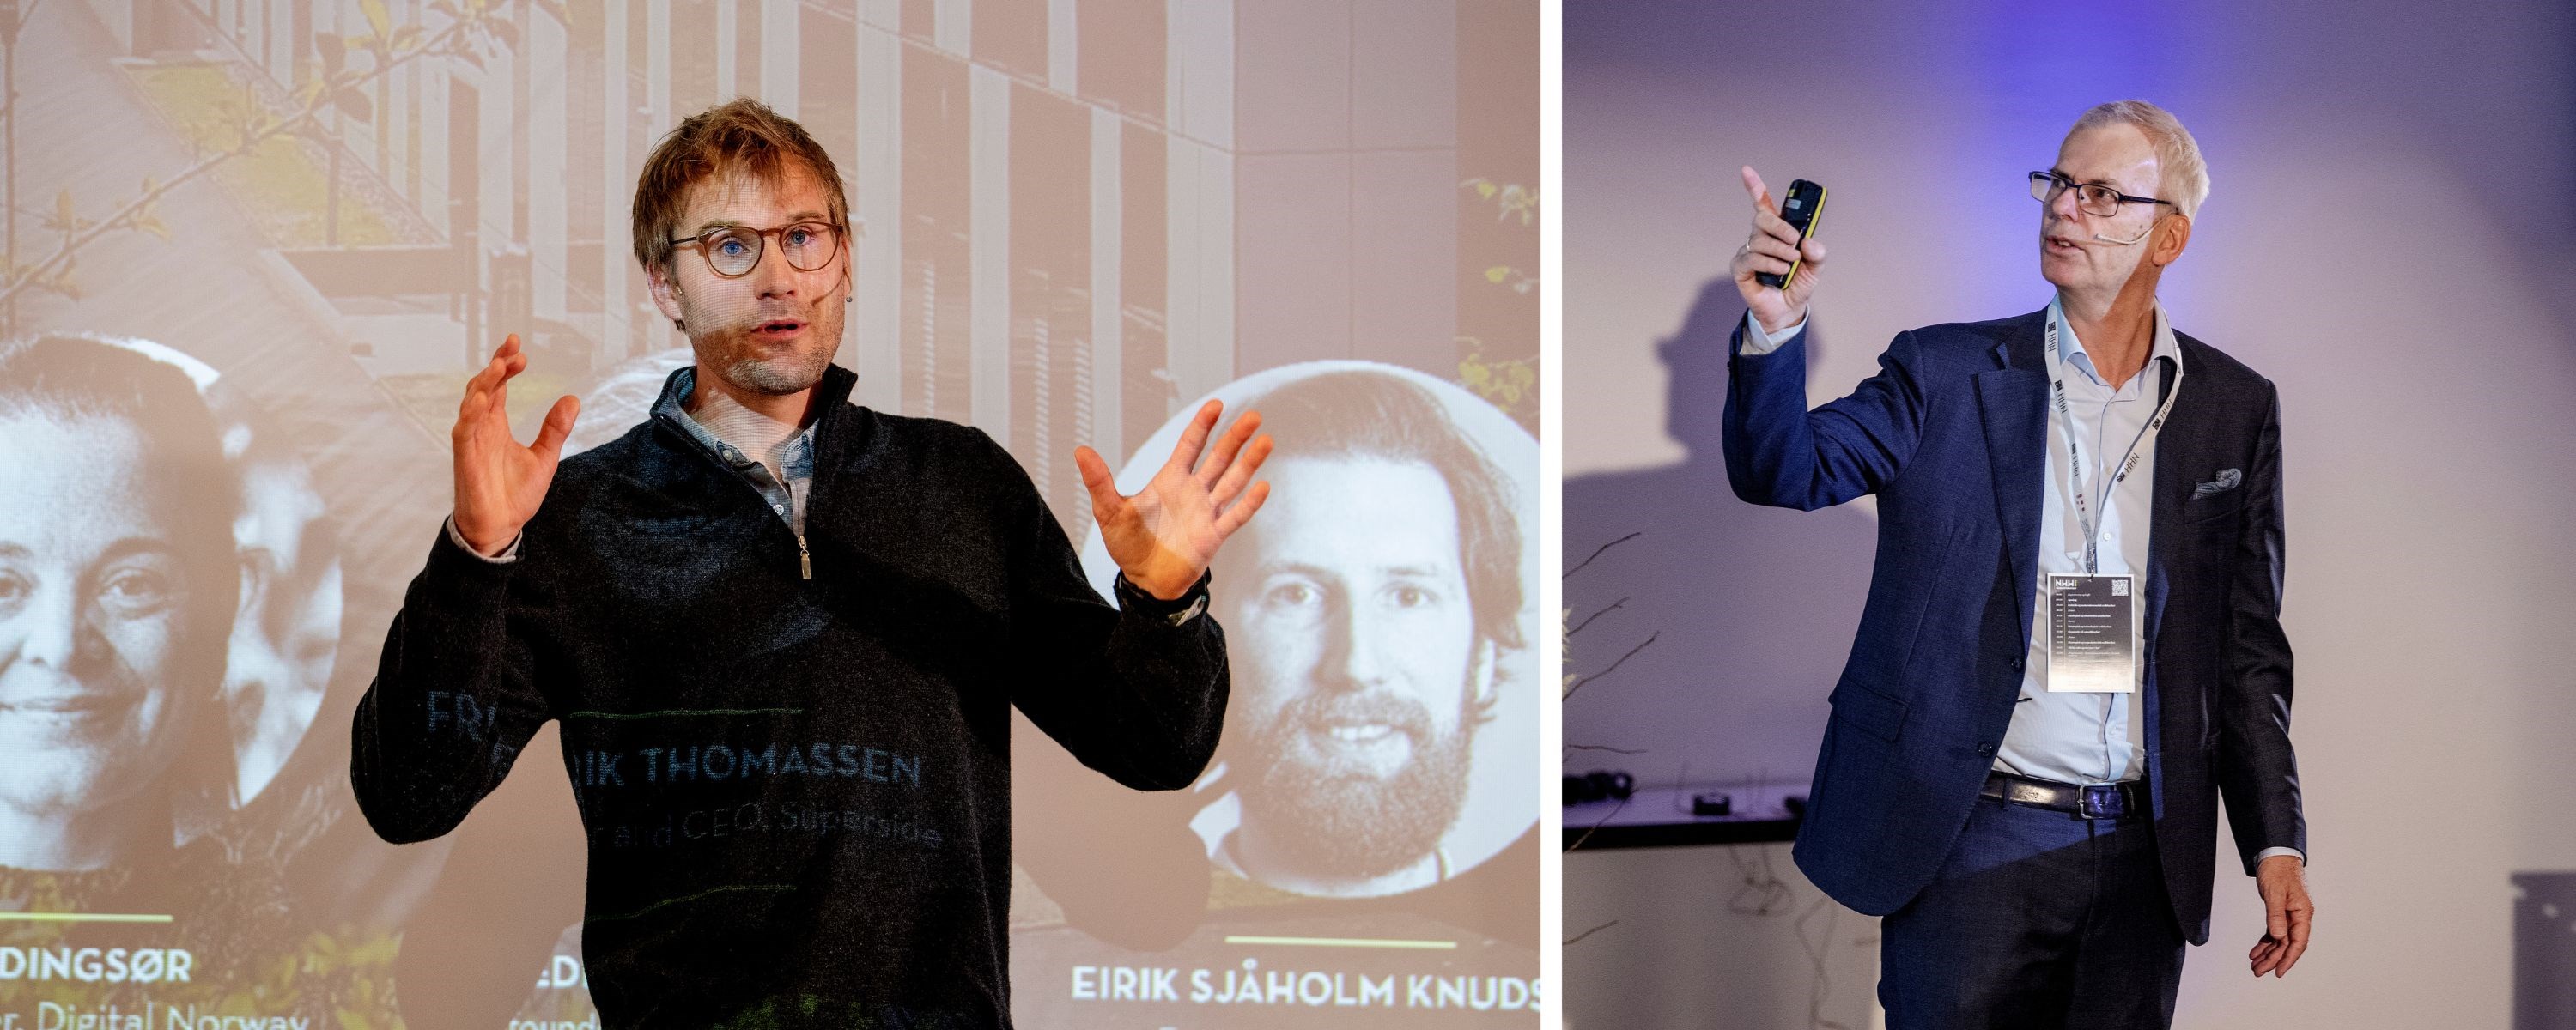 Pictures of CEO of Superside, Fredrik Thomassen, and NHH Rector Øystein Thøgersen. Both attended the NHH Spring Conference. Photo: Helge Skodvin